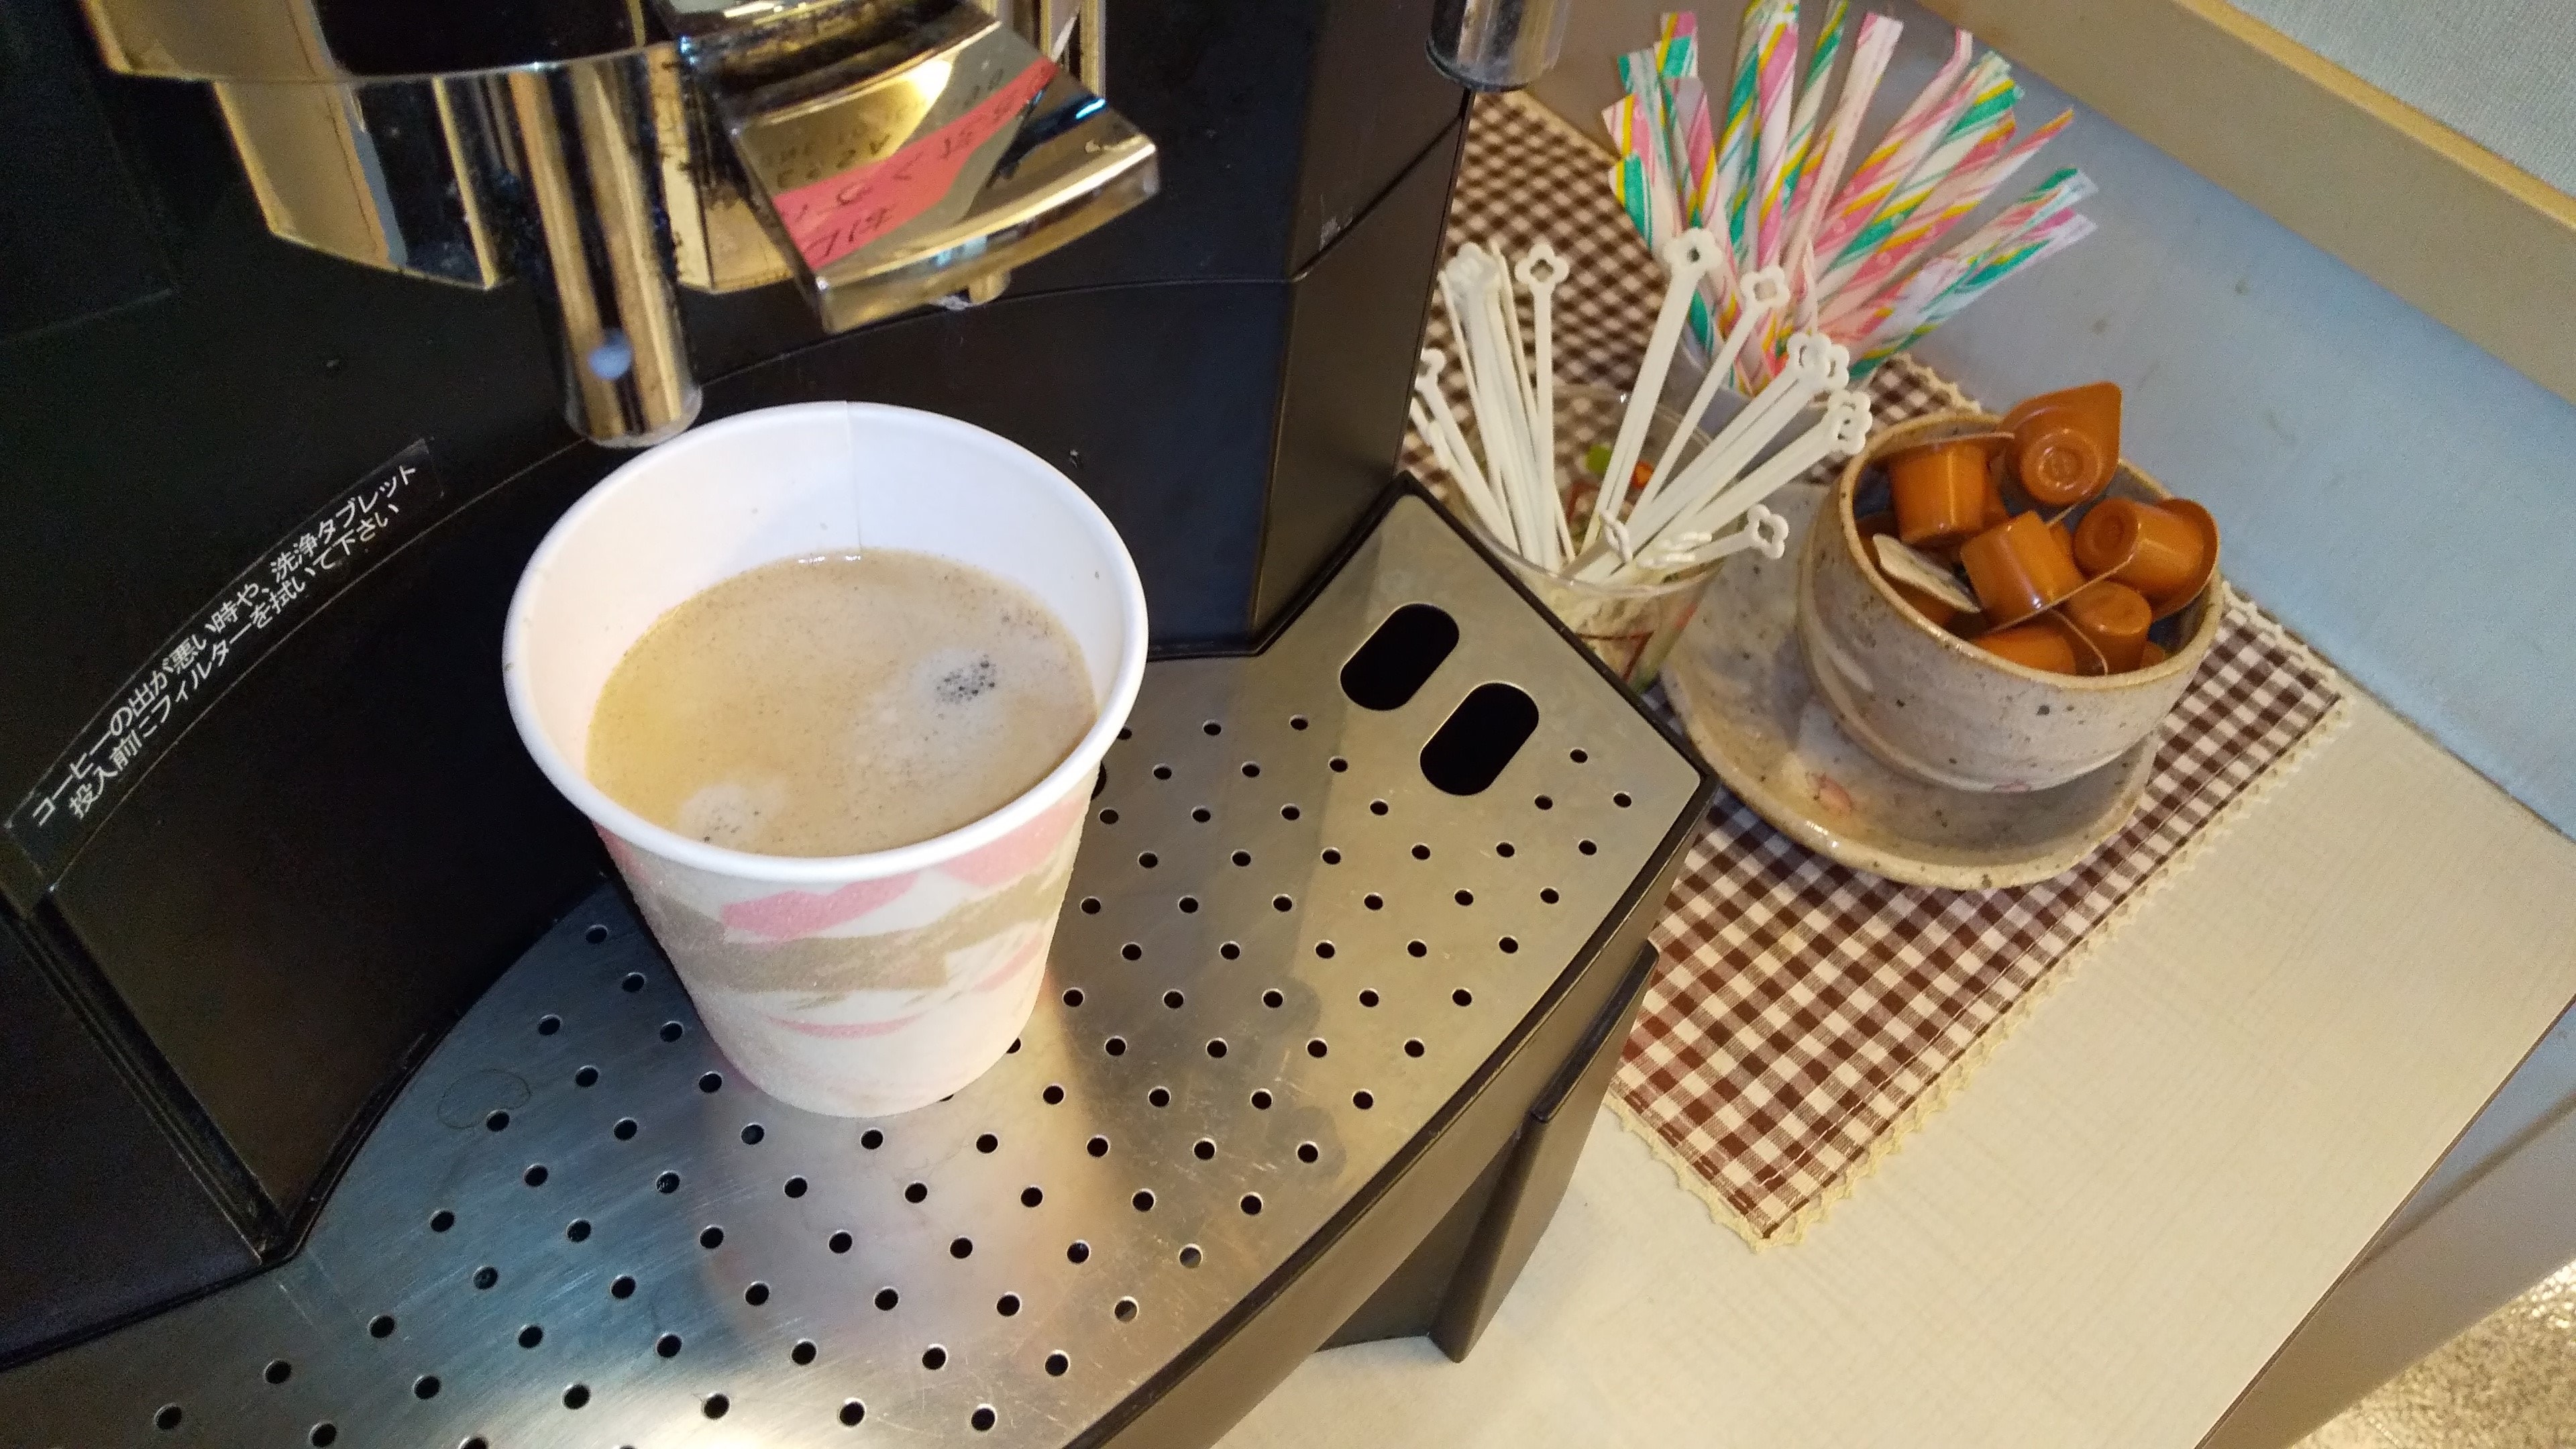 [Coffee machine] Available from 15:00 to 22:00 and the next morning from 6:30 to 10:00.